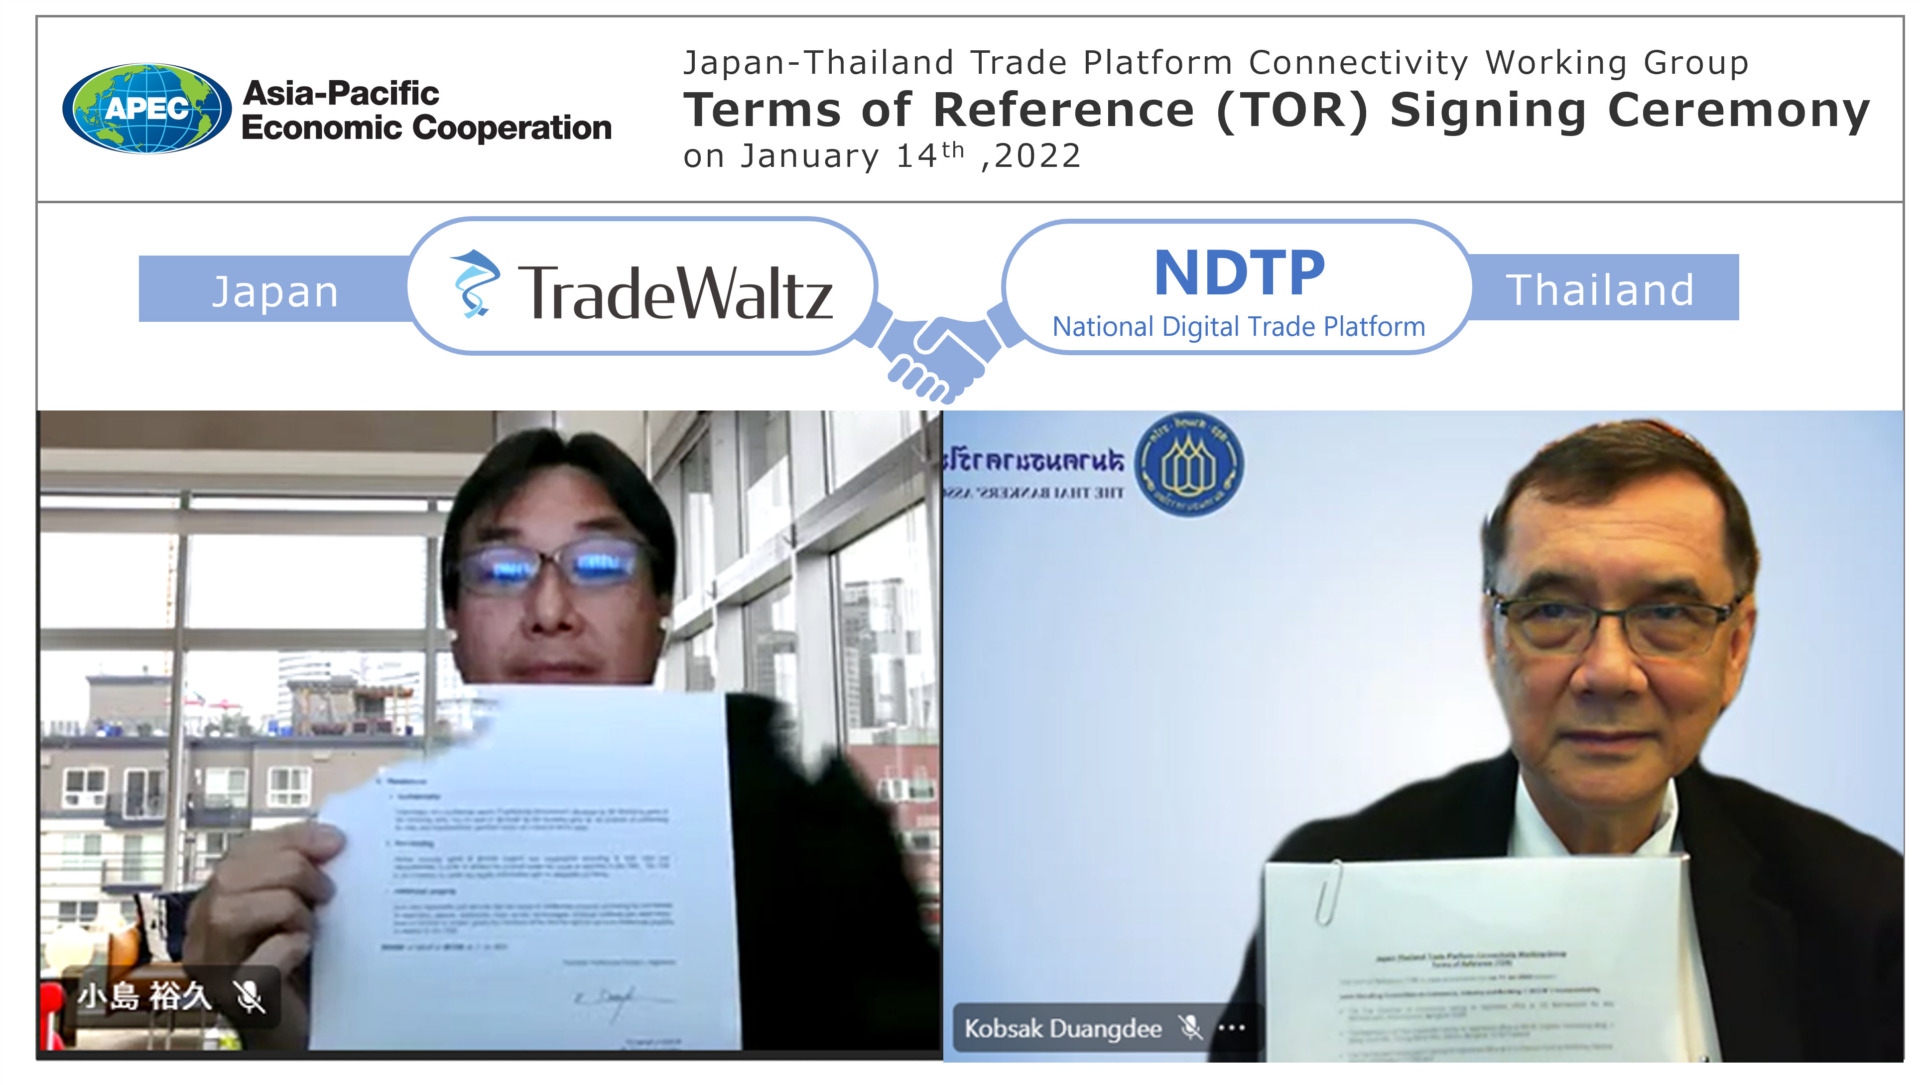 The Japanese Trading Platform TradeWaltz and the Thai Trading Platform NDTP Have Signed an International Terms of Reference (TOR) to Connect their Systems ~ with cooperation of Toyota Tsusho Corporation’s distribution channels  and digital bills of laden using TradeLens ~